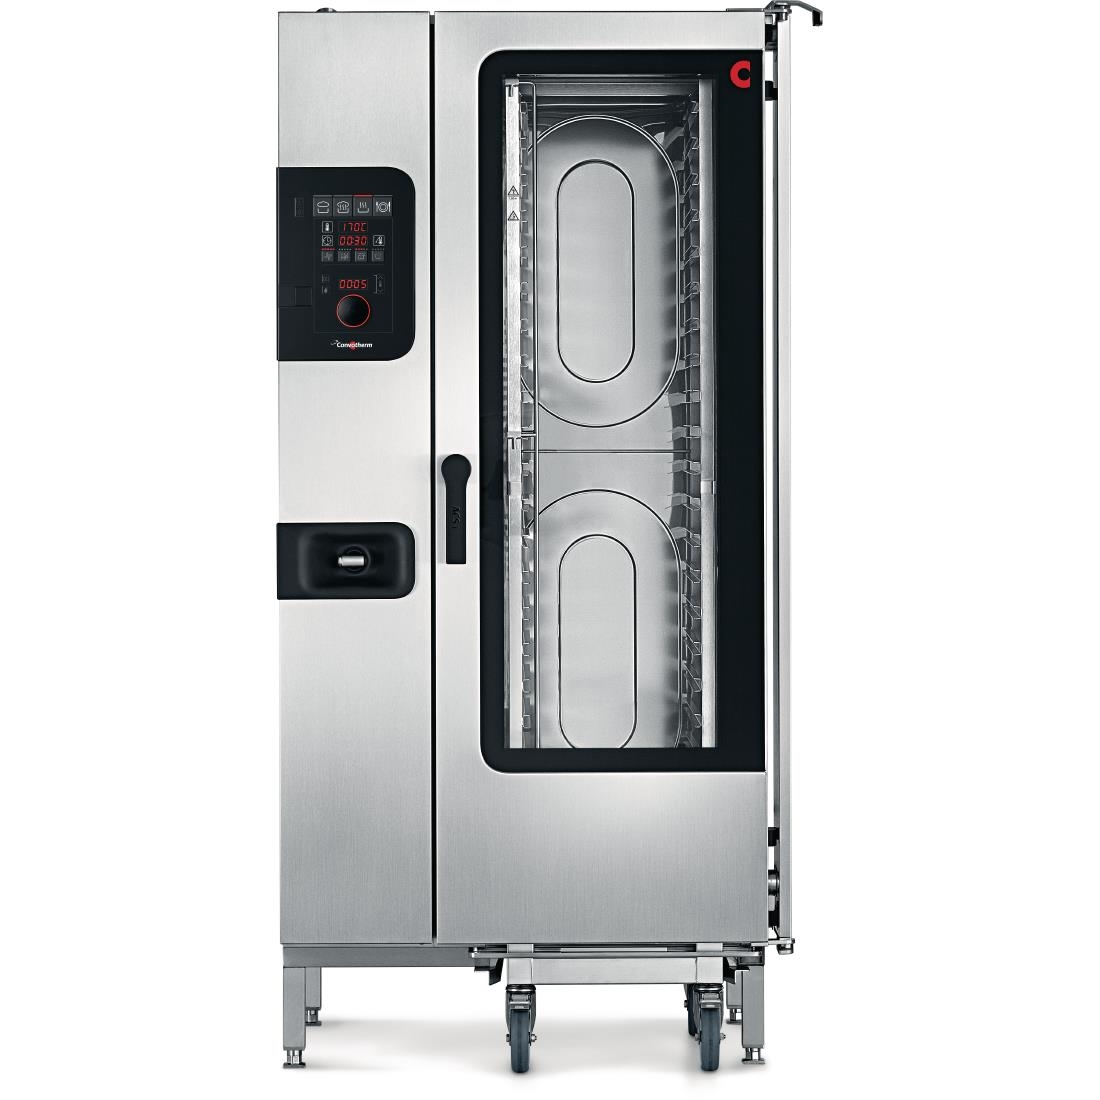 Convotherm 4 easyDial Combi Oven 20 x 1 x1 GN Grid with ConvoGrill and Install